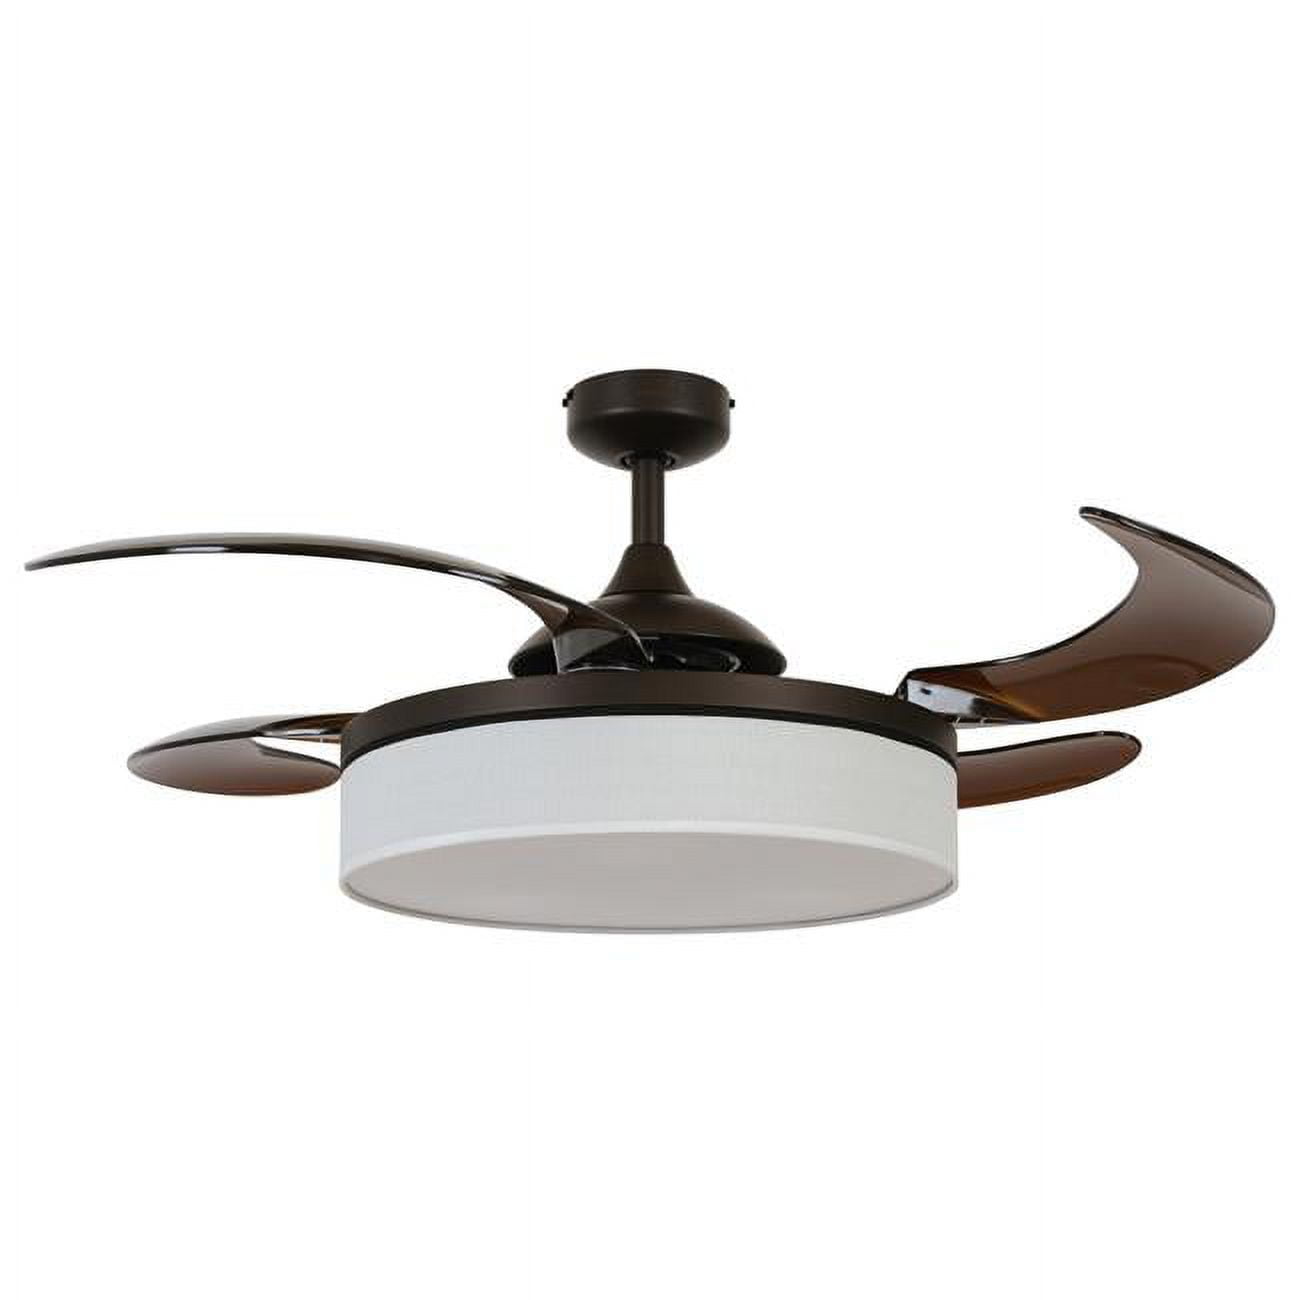 Picture of Fanaway 51103101 Fraser 48-inch Oil Rubbed Bronze and Amber AC Ceiling Fan with Light